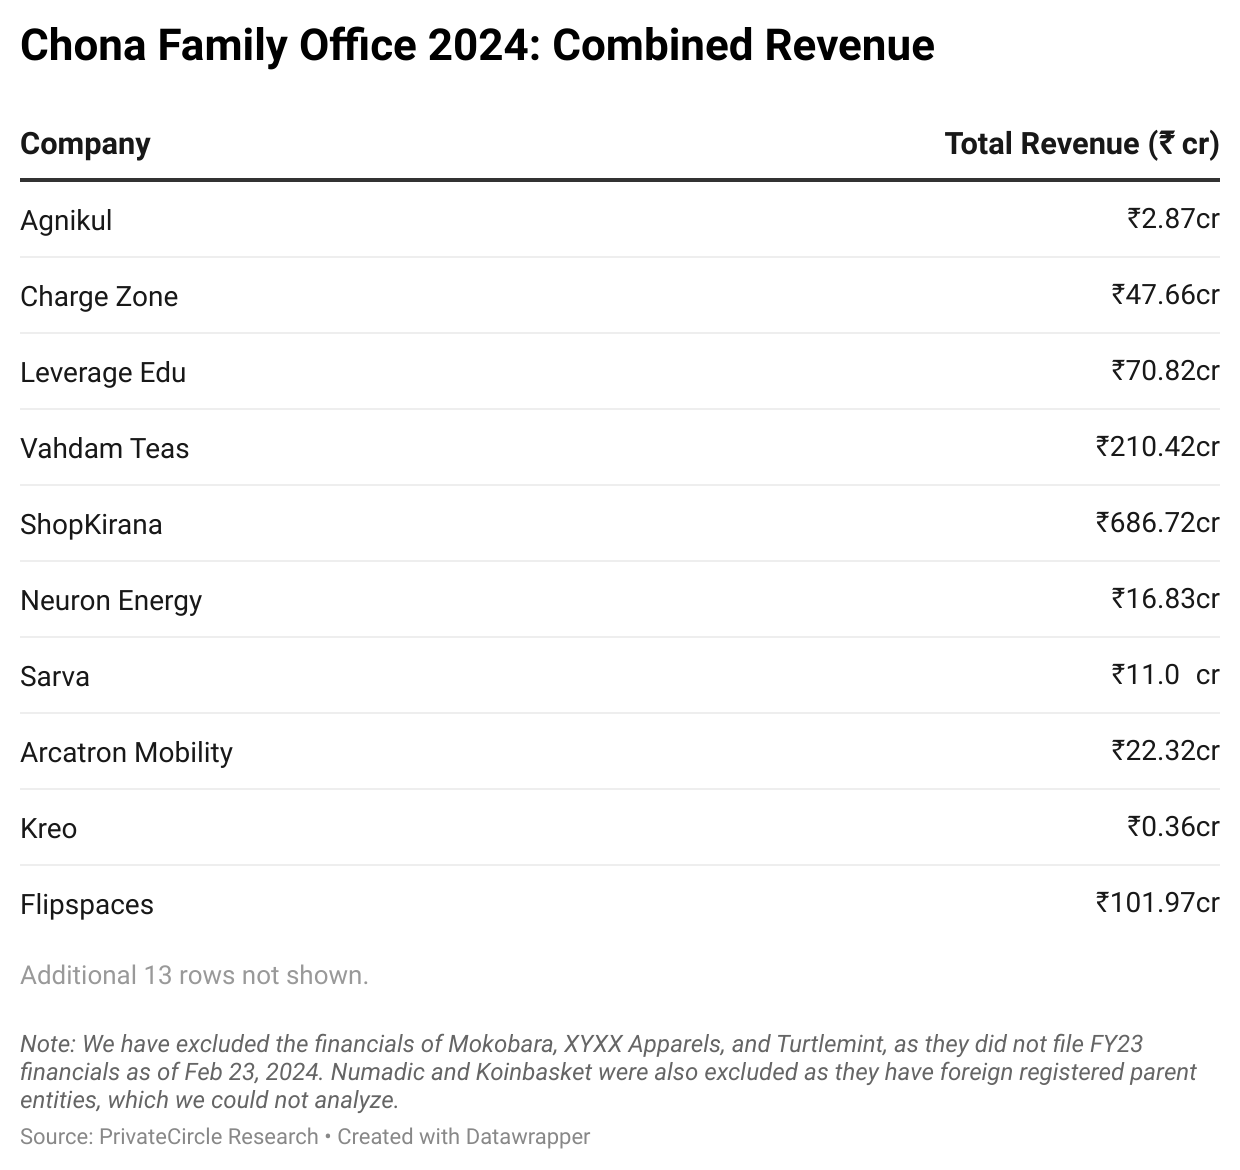 Chona Family Office 2024: Combined Revenue

The portfolio generated a combined revenue of over ₹13,000 cr with Nykaa, iDfy, and IndiaMart topping the list.